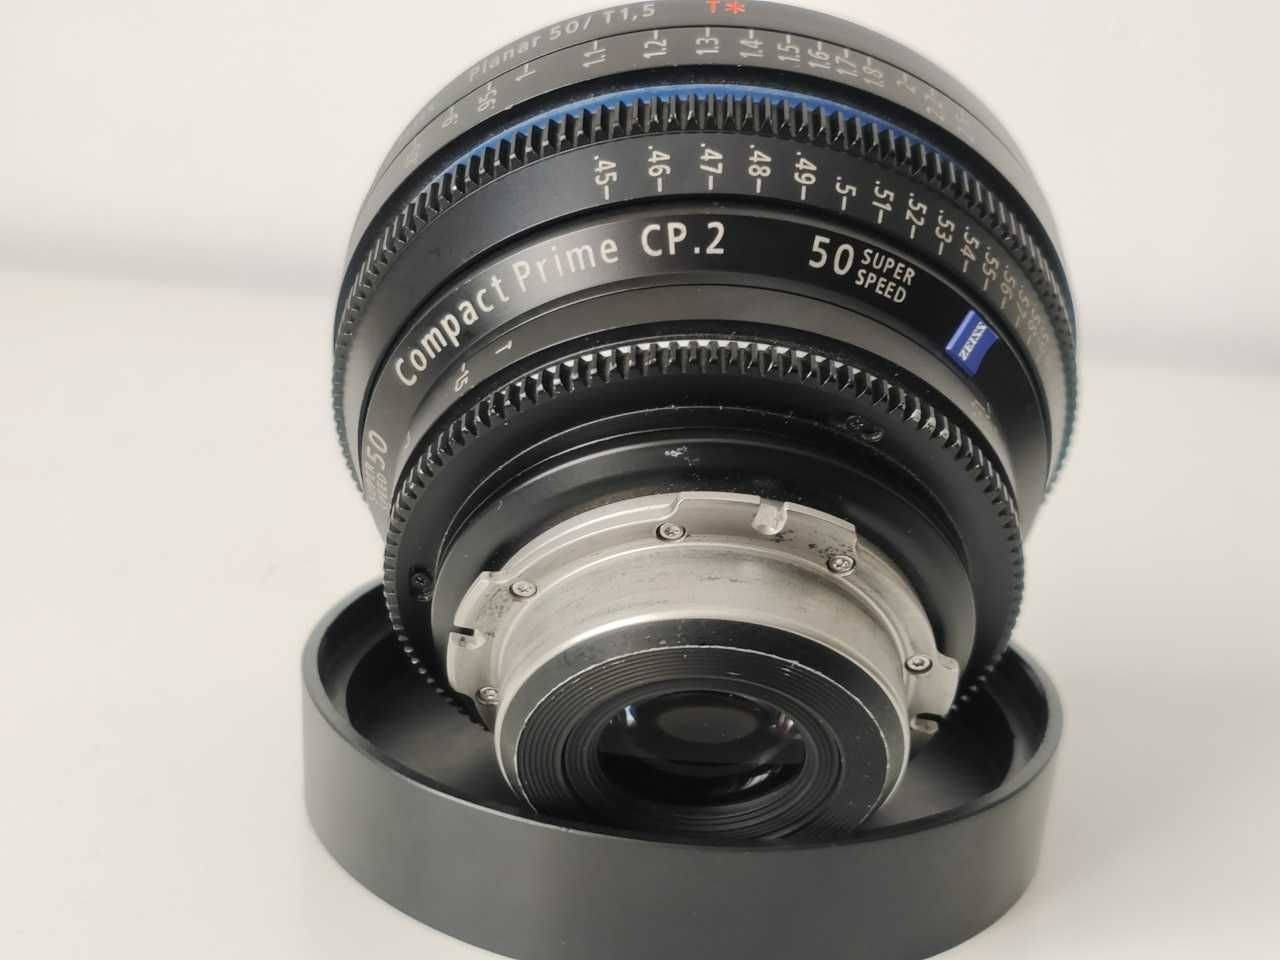 Zeiss obiektyw Compact Prime Planar CP.2 50 mm / T 1.5 Super Speed